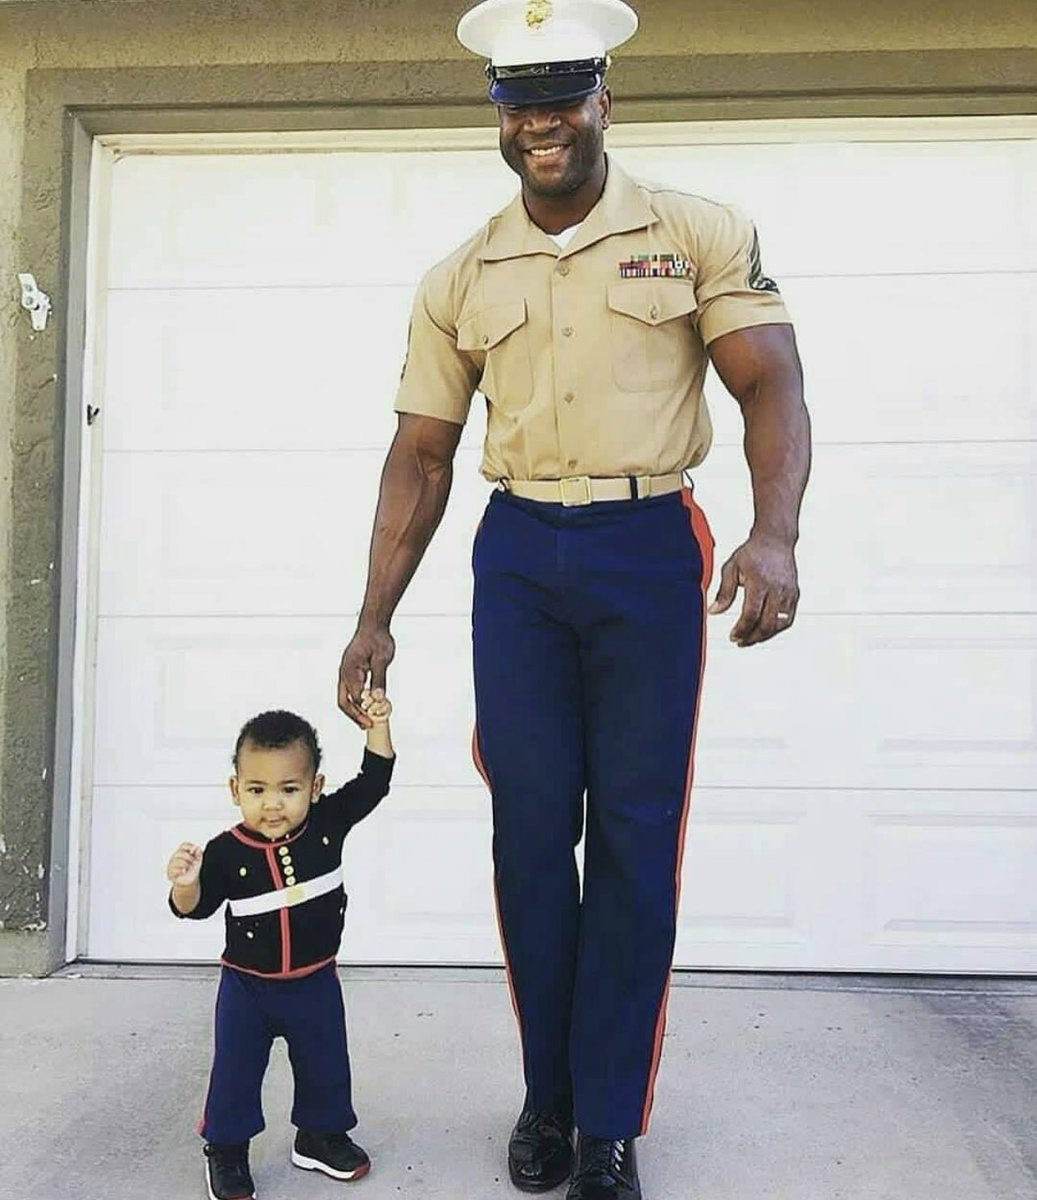 We Salute You: Like Father Like Son
 #military #soldier #usmilitary #usarmy #VetLivesMatter #troops #patriotic #veteran #VeteransLivesMatter #Army #WoundedWarrier #vets #patriot #WoundedWarriorProject #Hero #PTSDWarrior #SupportOurTroops #MemorialDay #VeteransBenefits #patriots